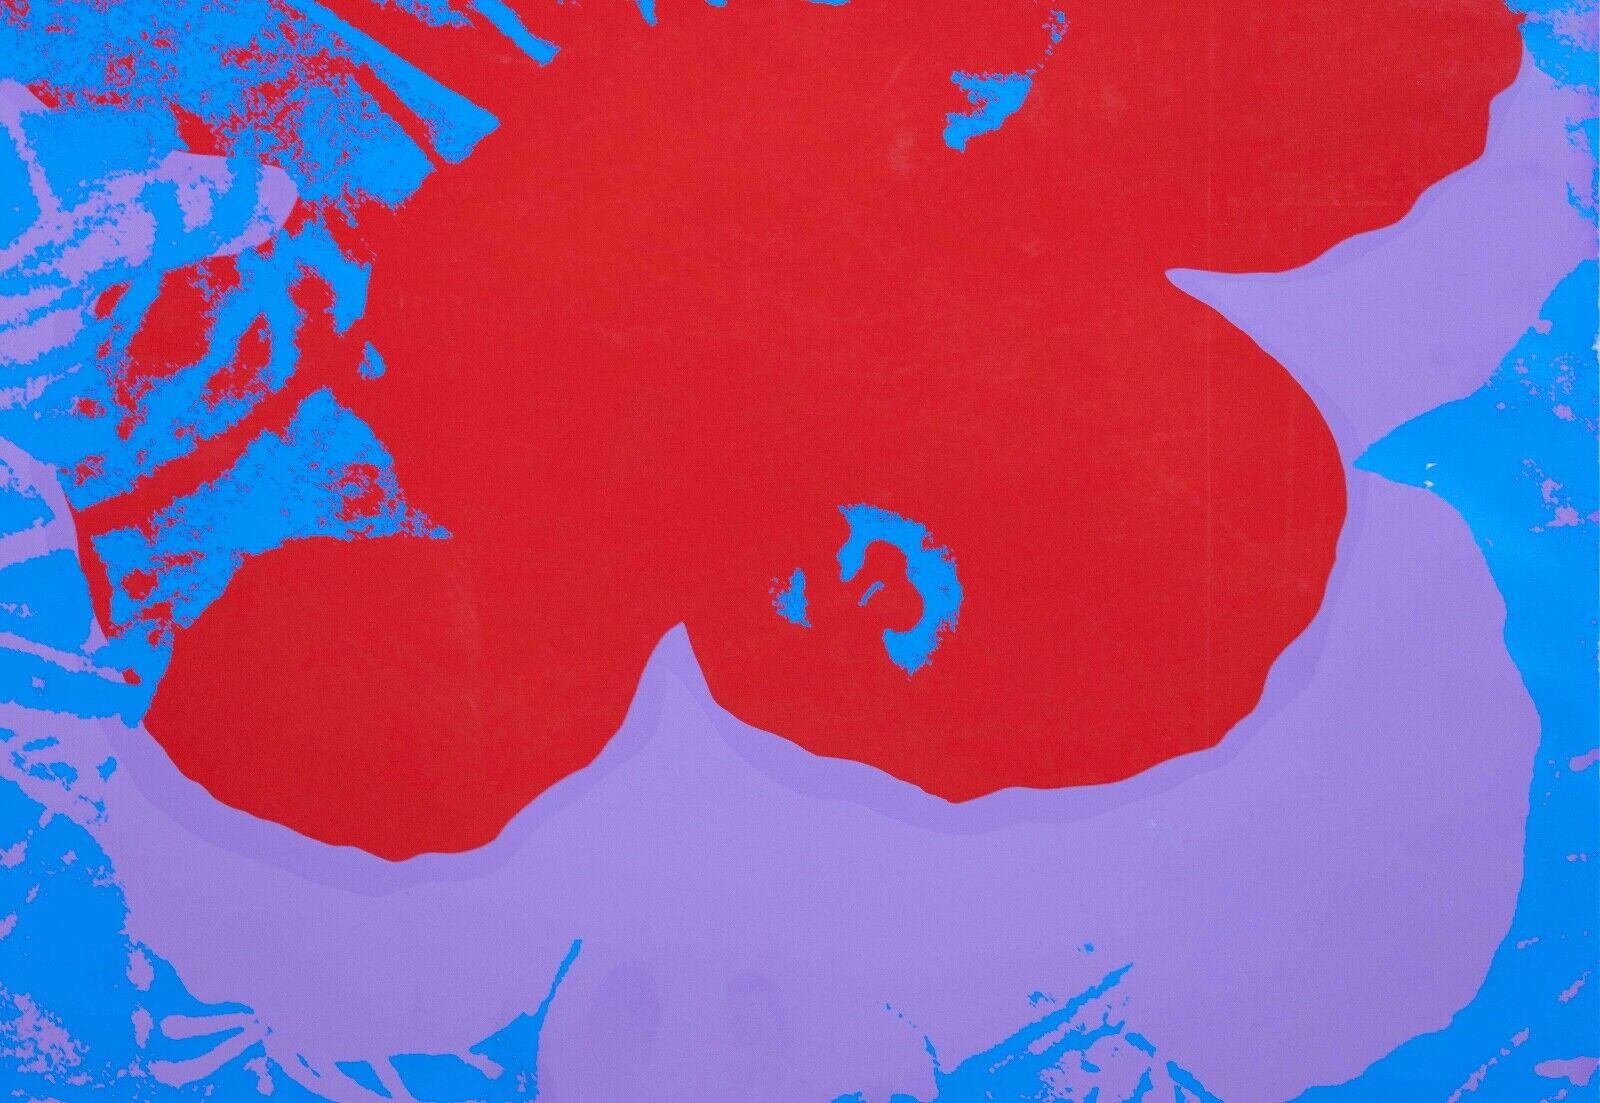 An iconic Pop Art silkscreen in colors titled “Flowers (F. & S. II.66)” by Andy Warhol. From a vintage silkscreen poster, published in 1970. Numbered ‘93504’ on verso in pencil. From the delicate studies of flowers in Renaissance paintings to the